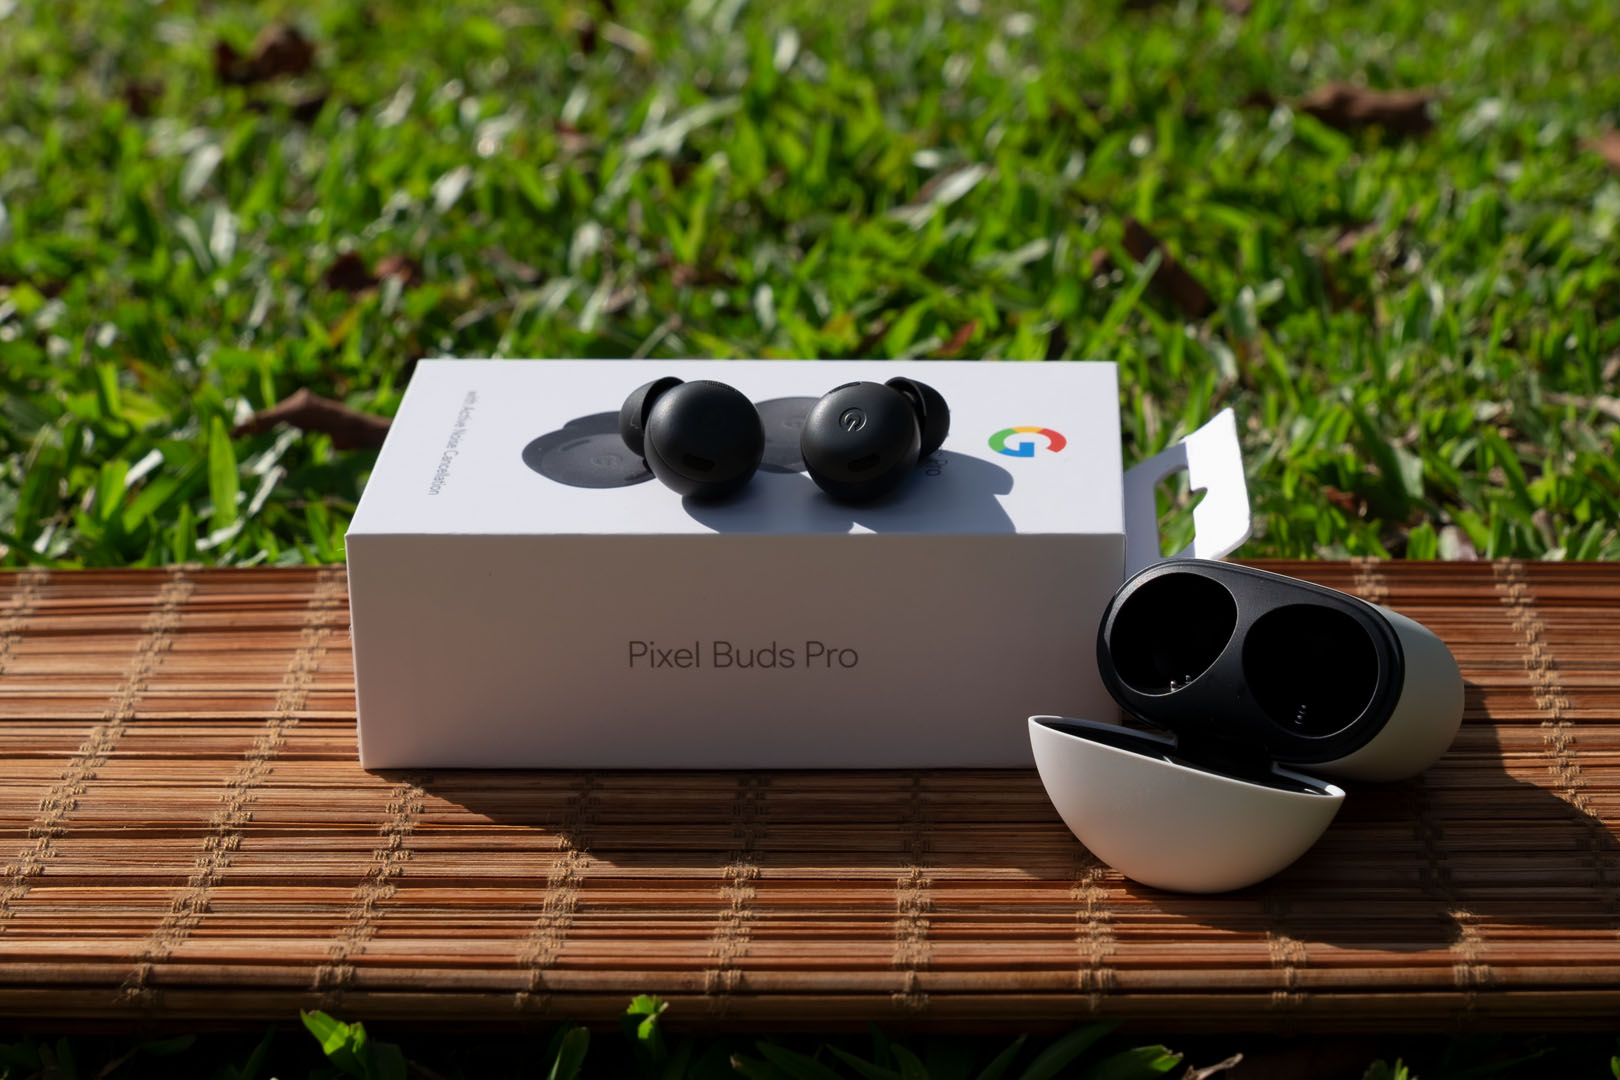 Google Pixel Buds Pro: The new standard in Android earbuds